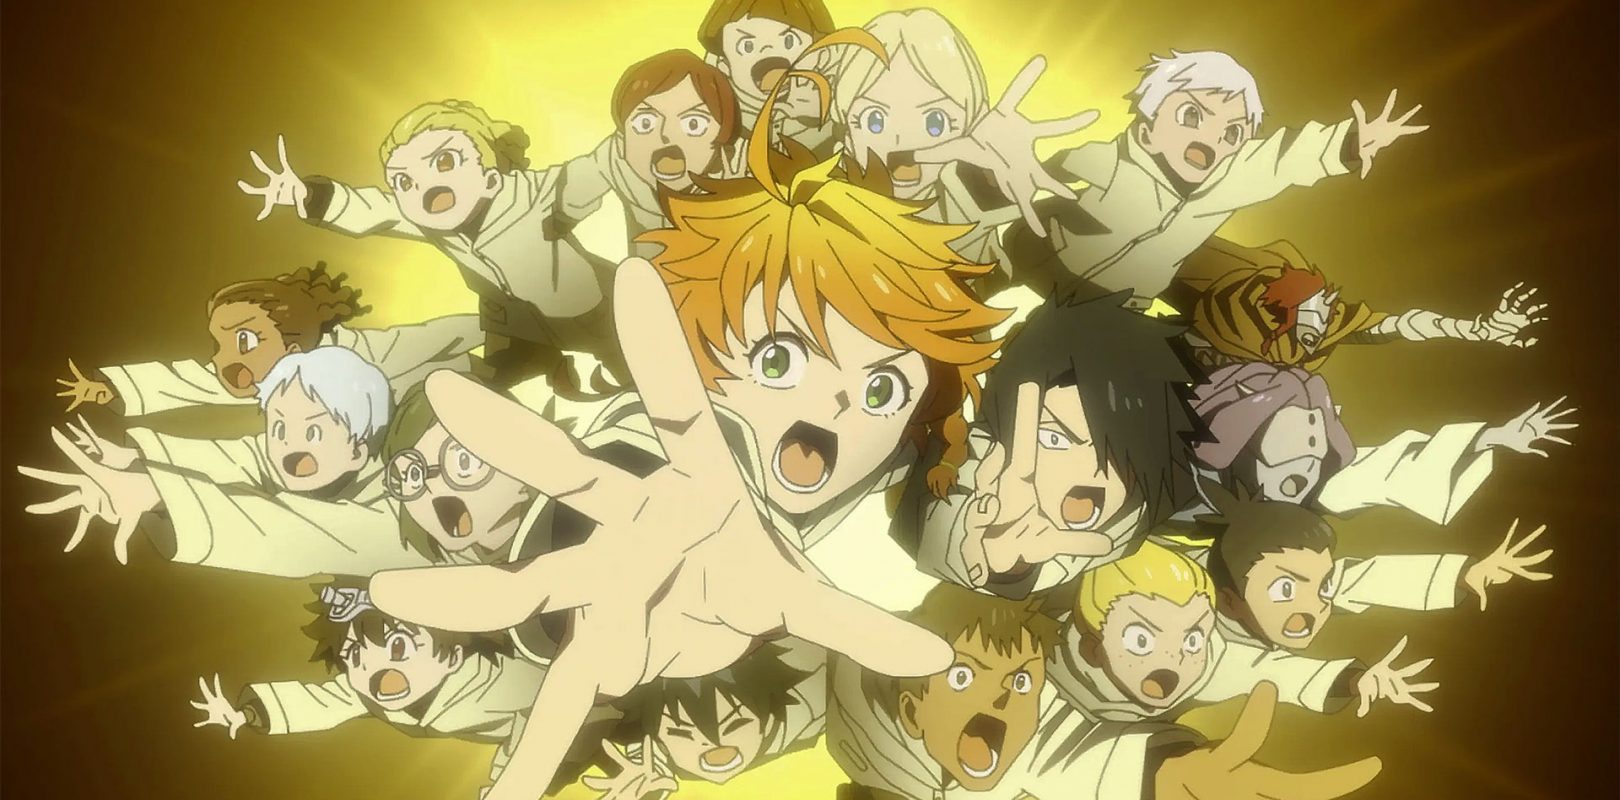 promised neverland cover 1620x800 1 - The Promised Neverland Store